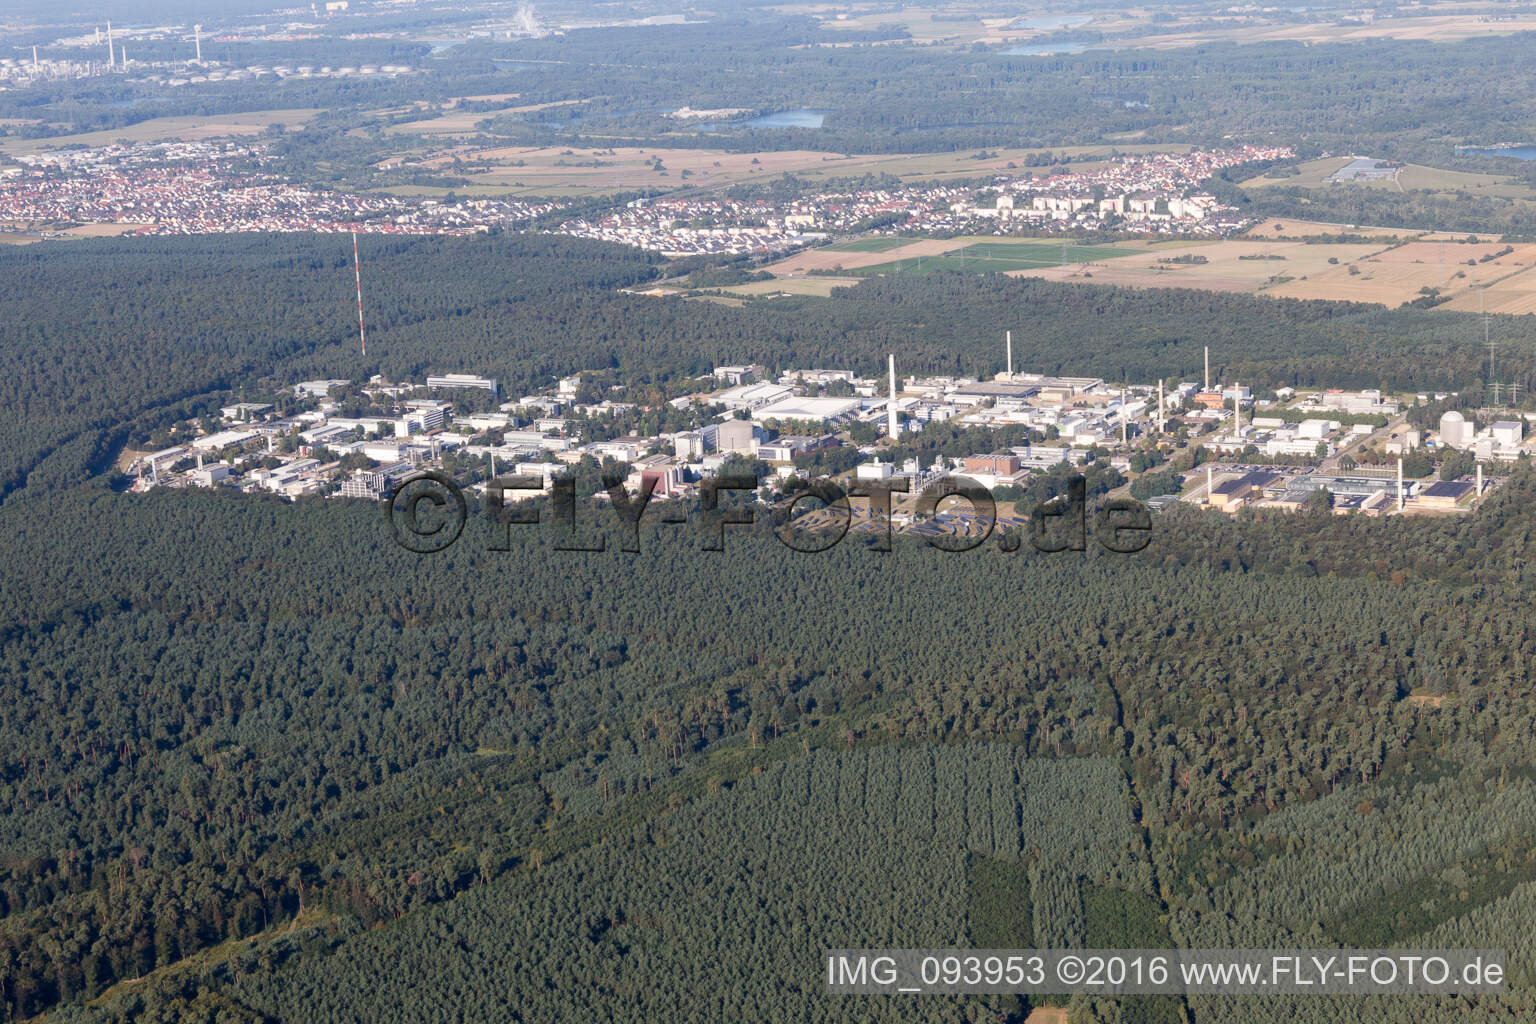 Oblique view of KIT North in the district Leopoldshafen in Eggenstein-Leopoldshafen in the state Baden-Wuerttemberg, Germany